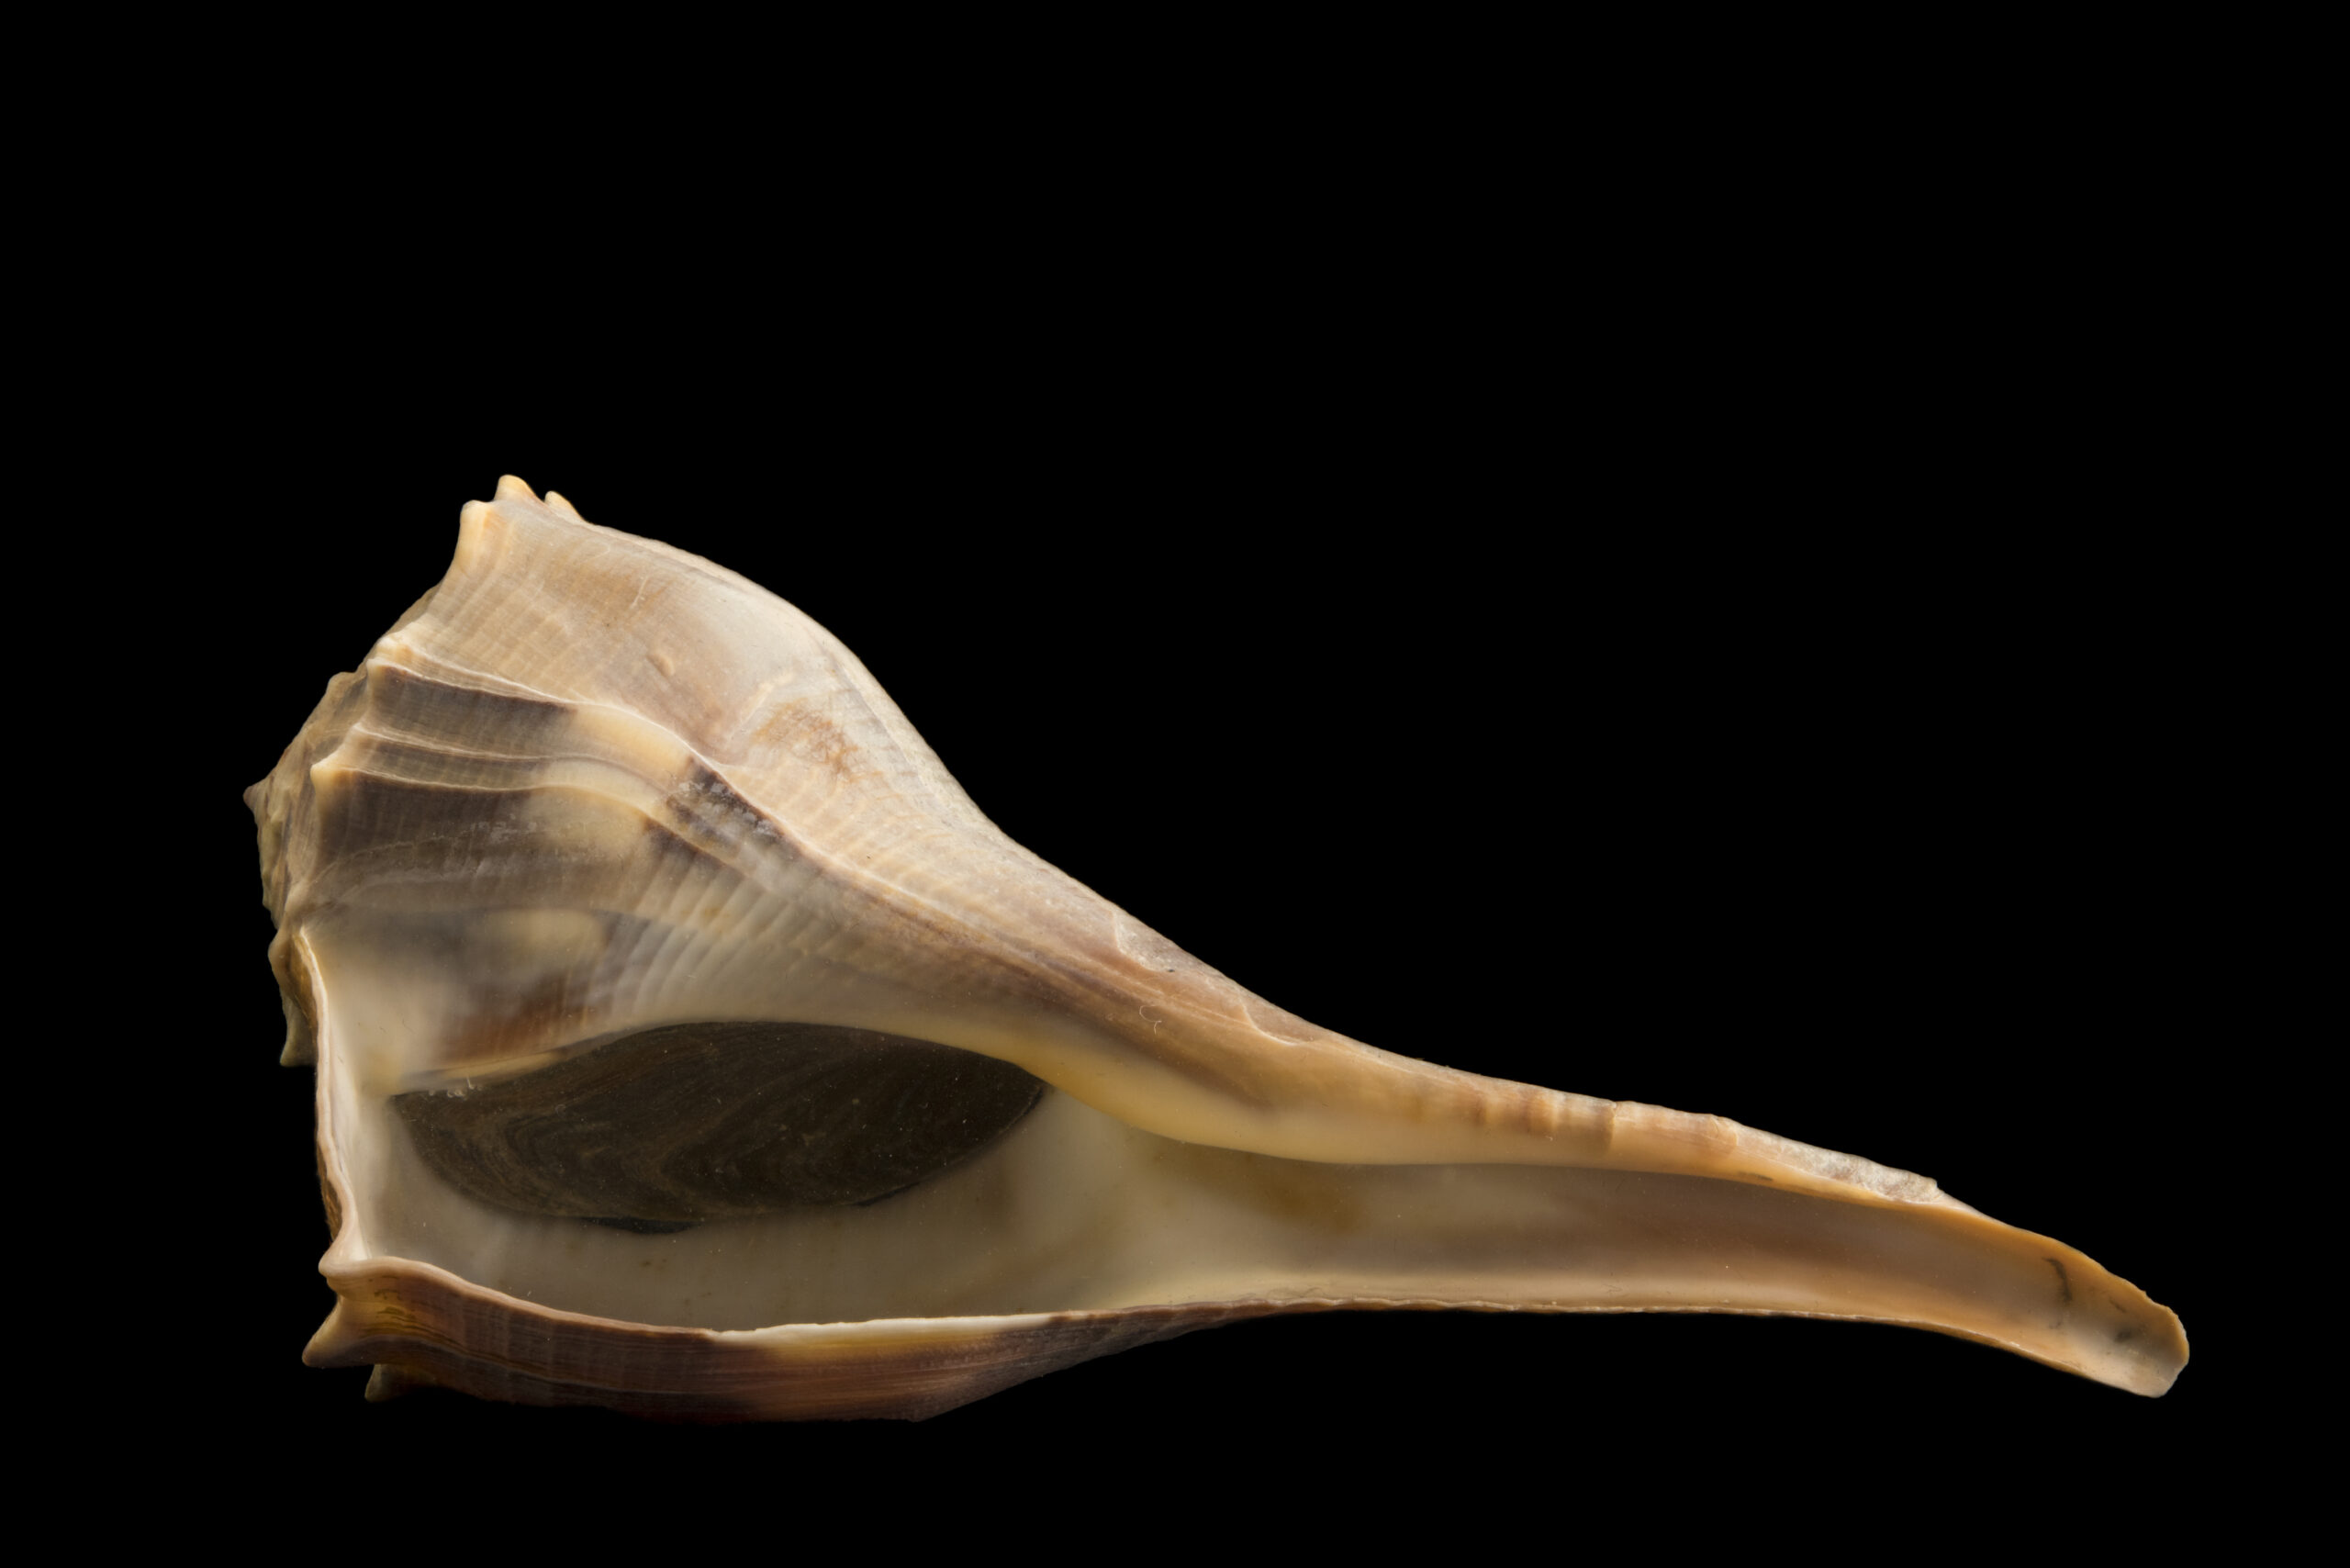 Left handed whelk (Busycon contrarium), with eggs